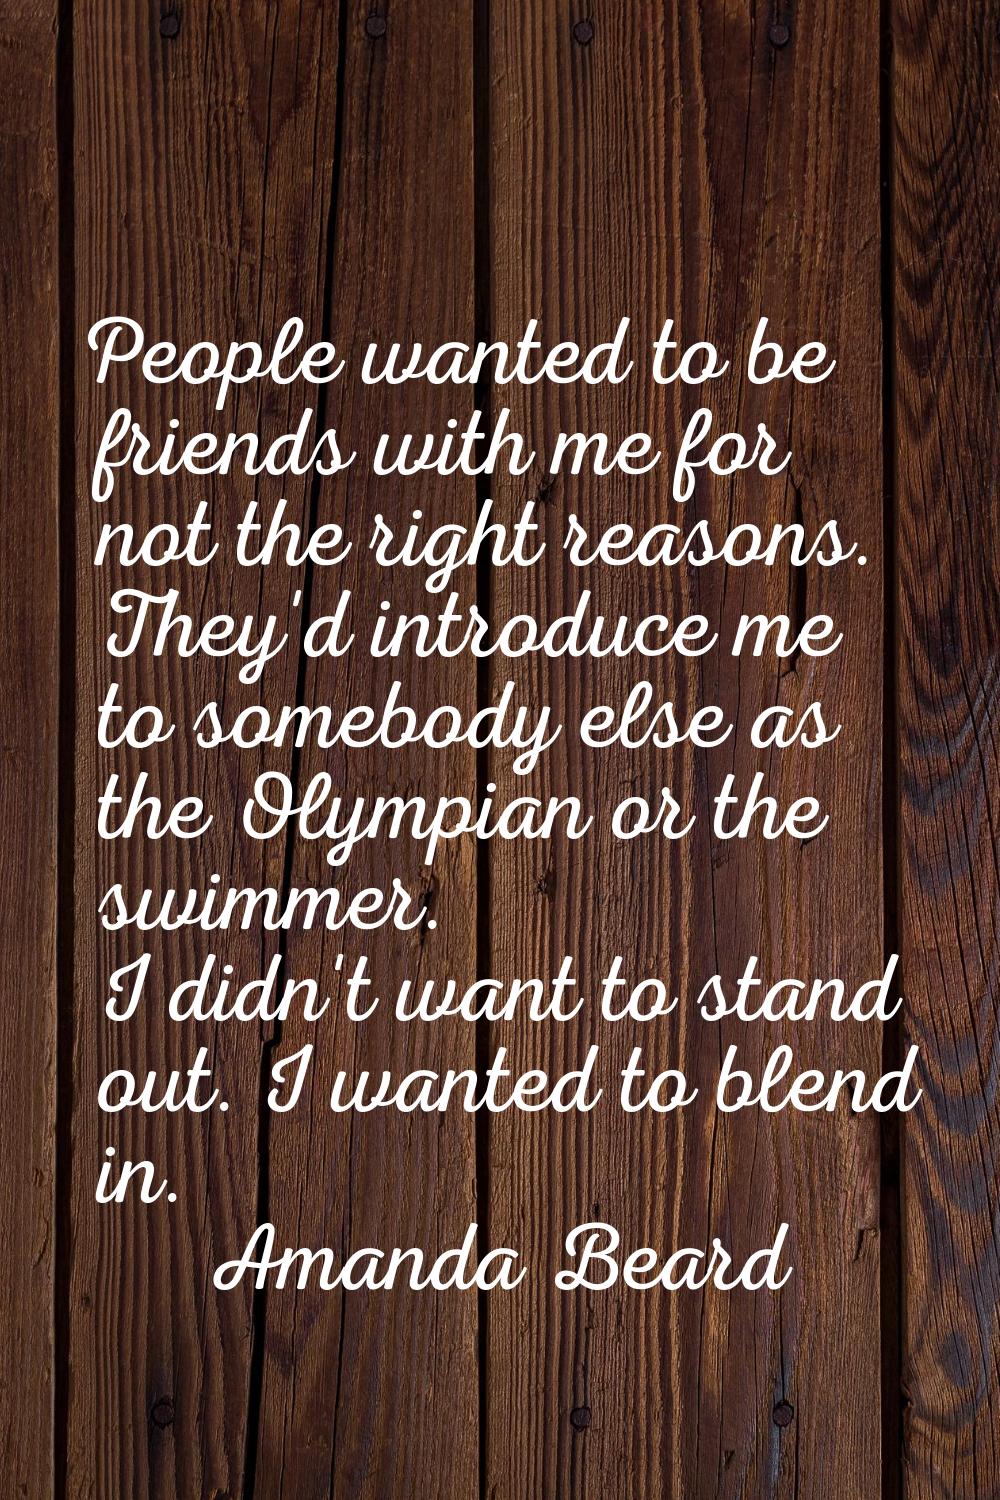 People wanted to be friends with me for not the right reasons. They'd introduce me to somebody else